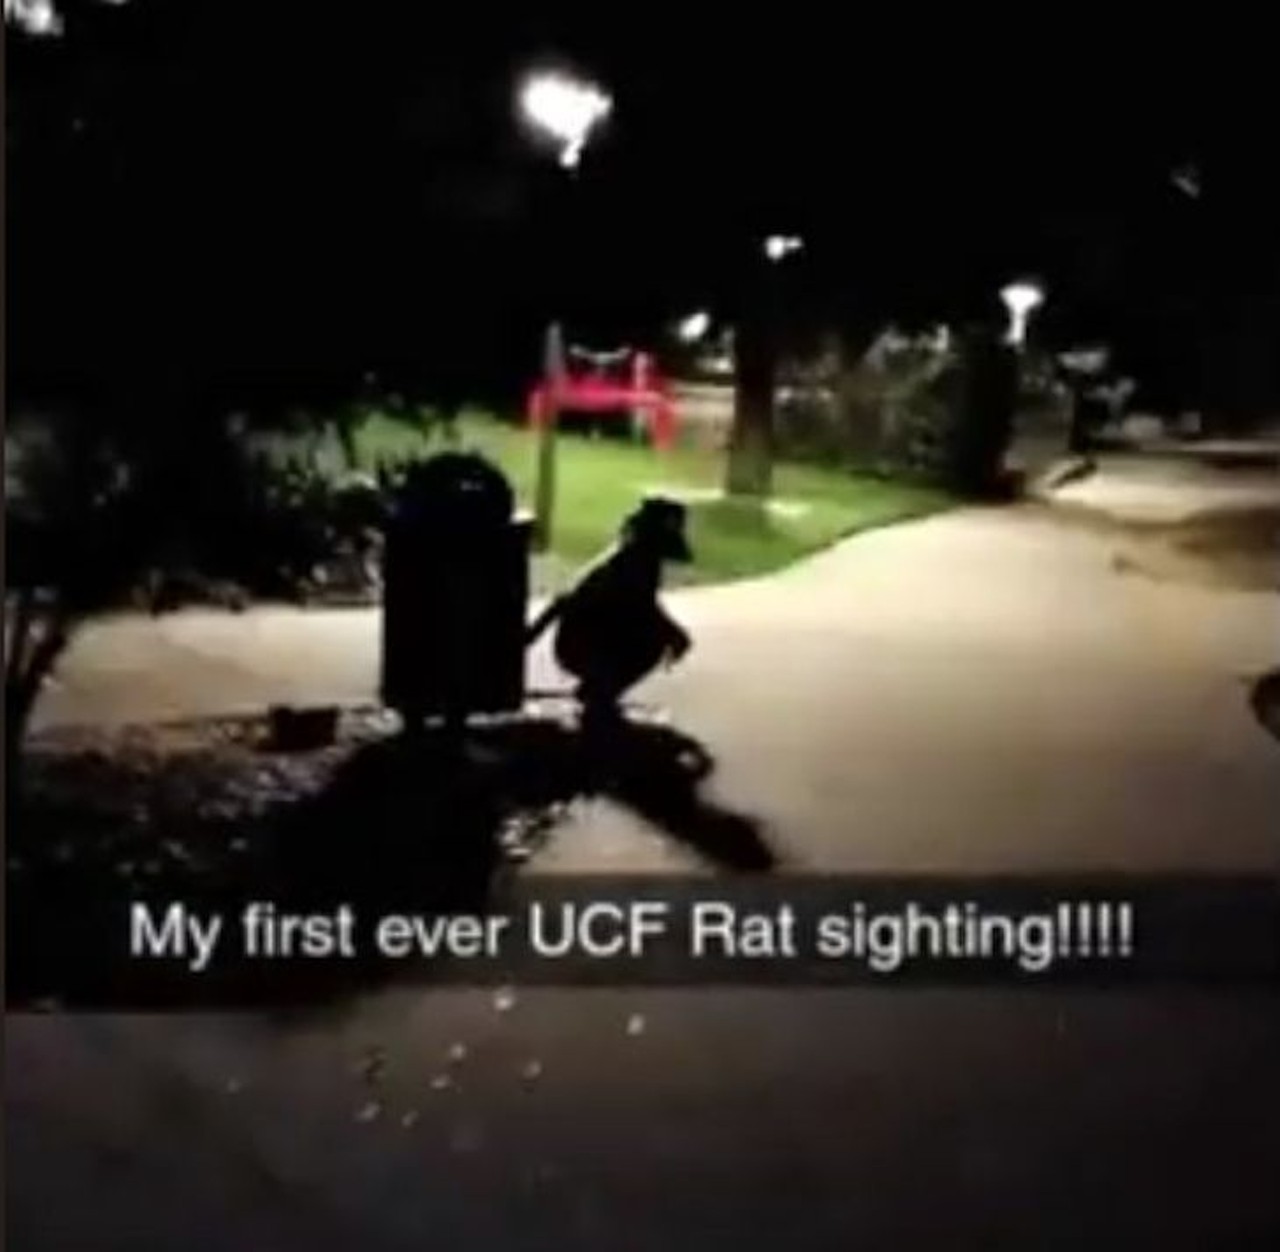 UCF&#146;s Rat Man
In 2018, University of Central Florida students began noticing &#147;Rat Man,&#148; an adult man wearing a makeshift rat mask and tail who silently walked around campus at night. Nobody knew whether he was a friend or foe, but he was often seen in the dark near trash cans and stopped a bike thief once. There have been no reported sightings of Rat Man since last May, but hopefully the rodent hero is still at large. 
Photo via Twitter/UCF Police Department